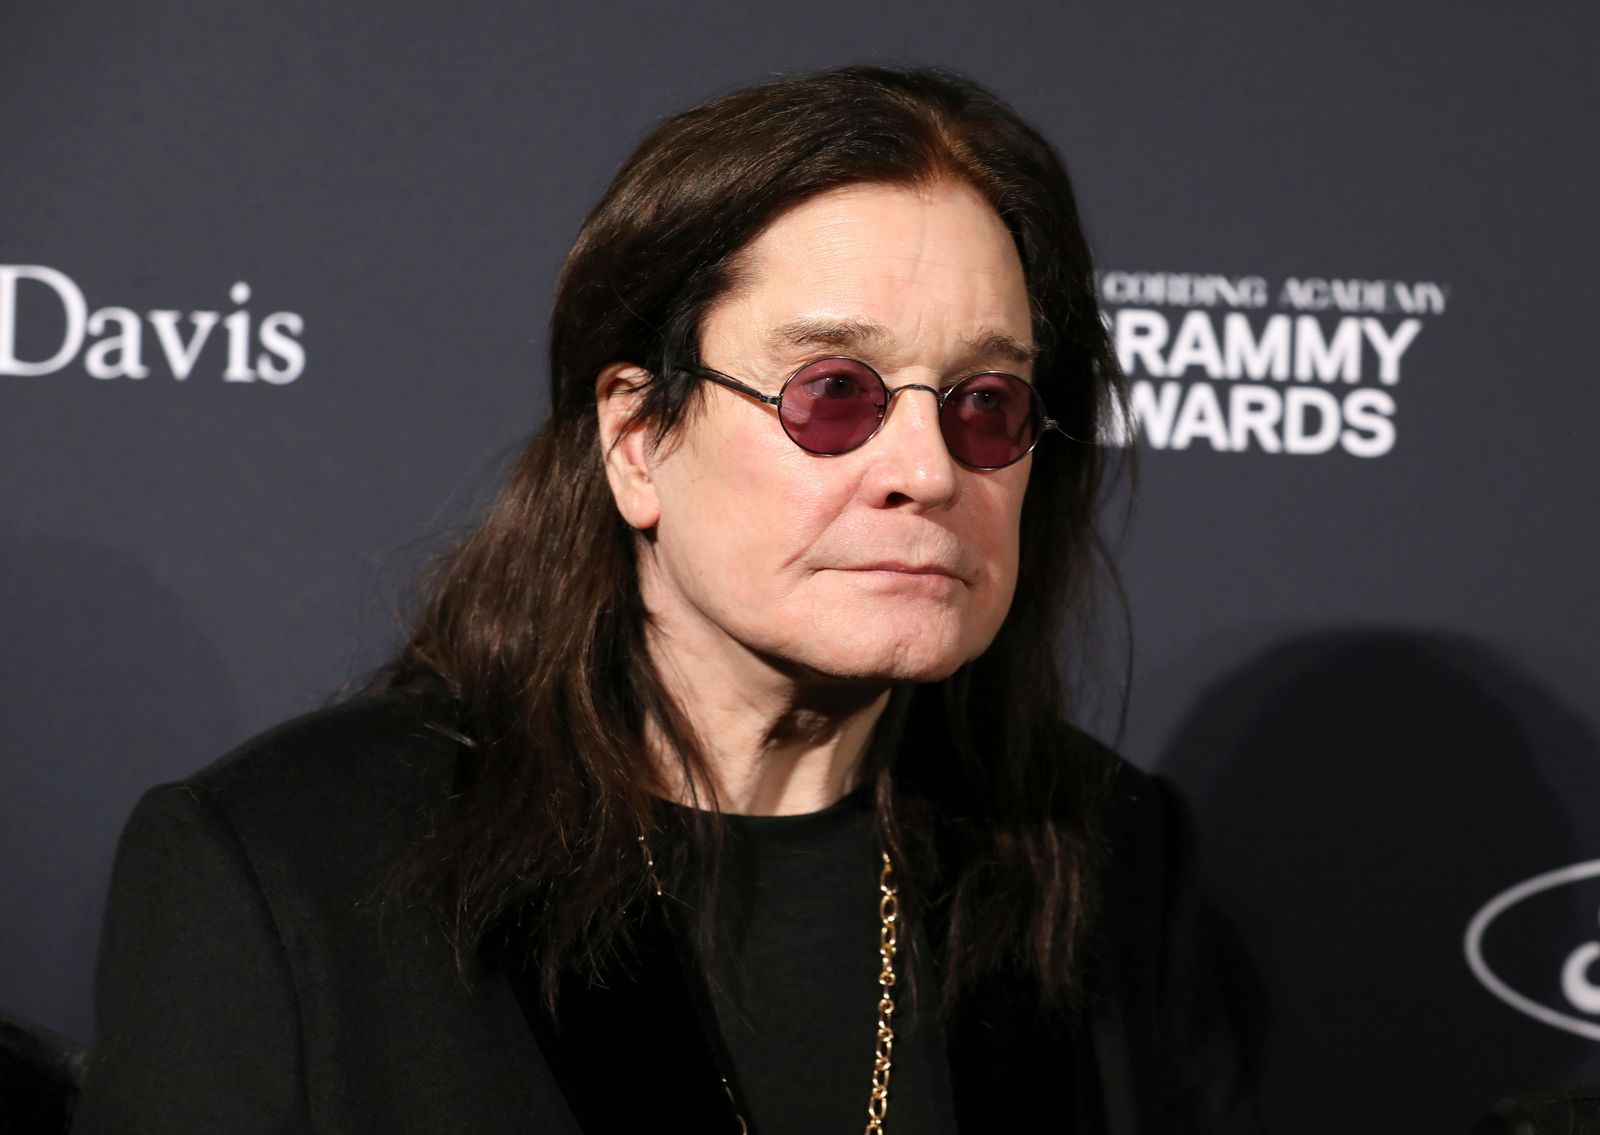 Ozzy Osbourne Cancels All Shows, Says His Touring Career is Over